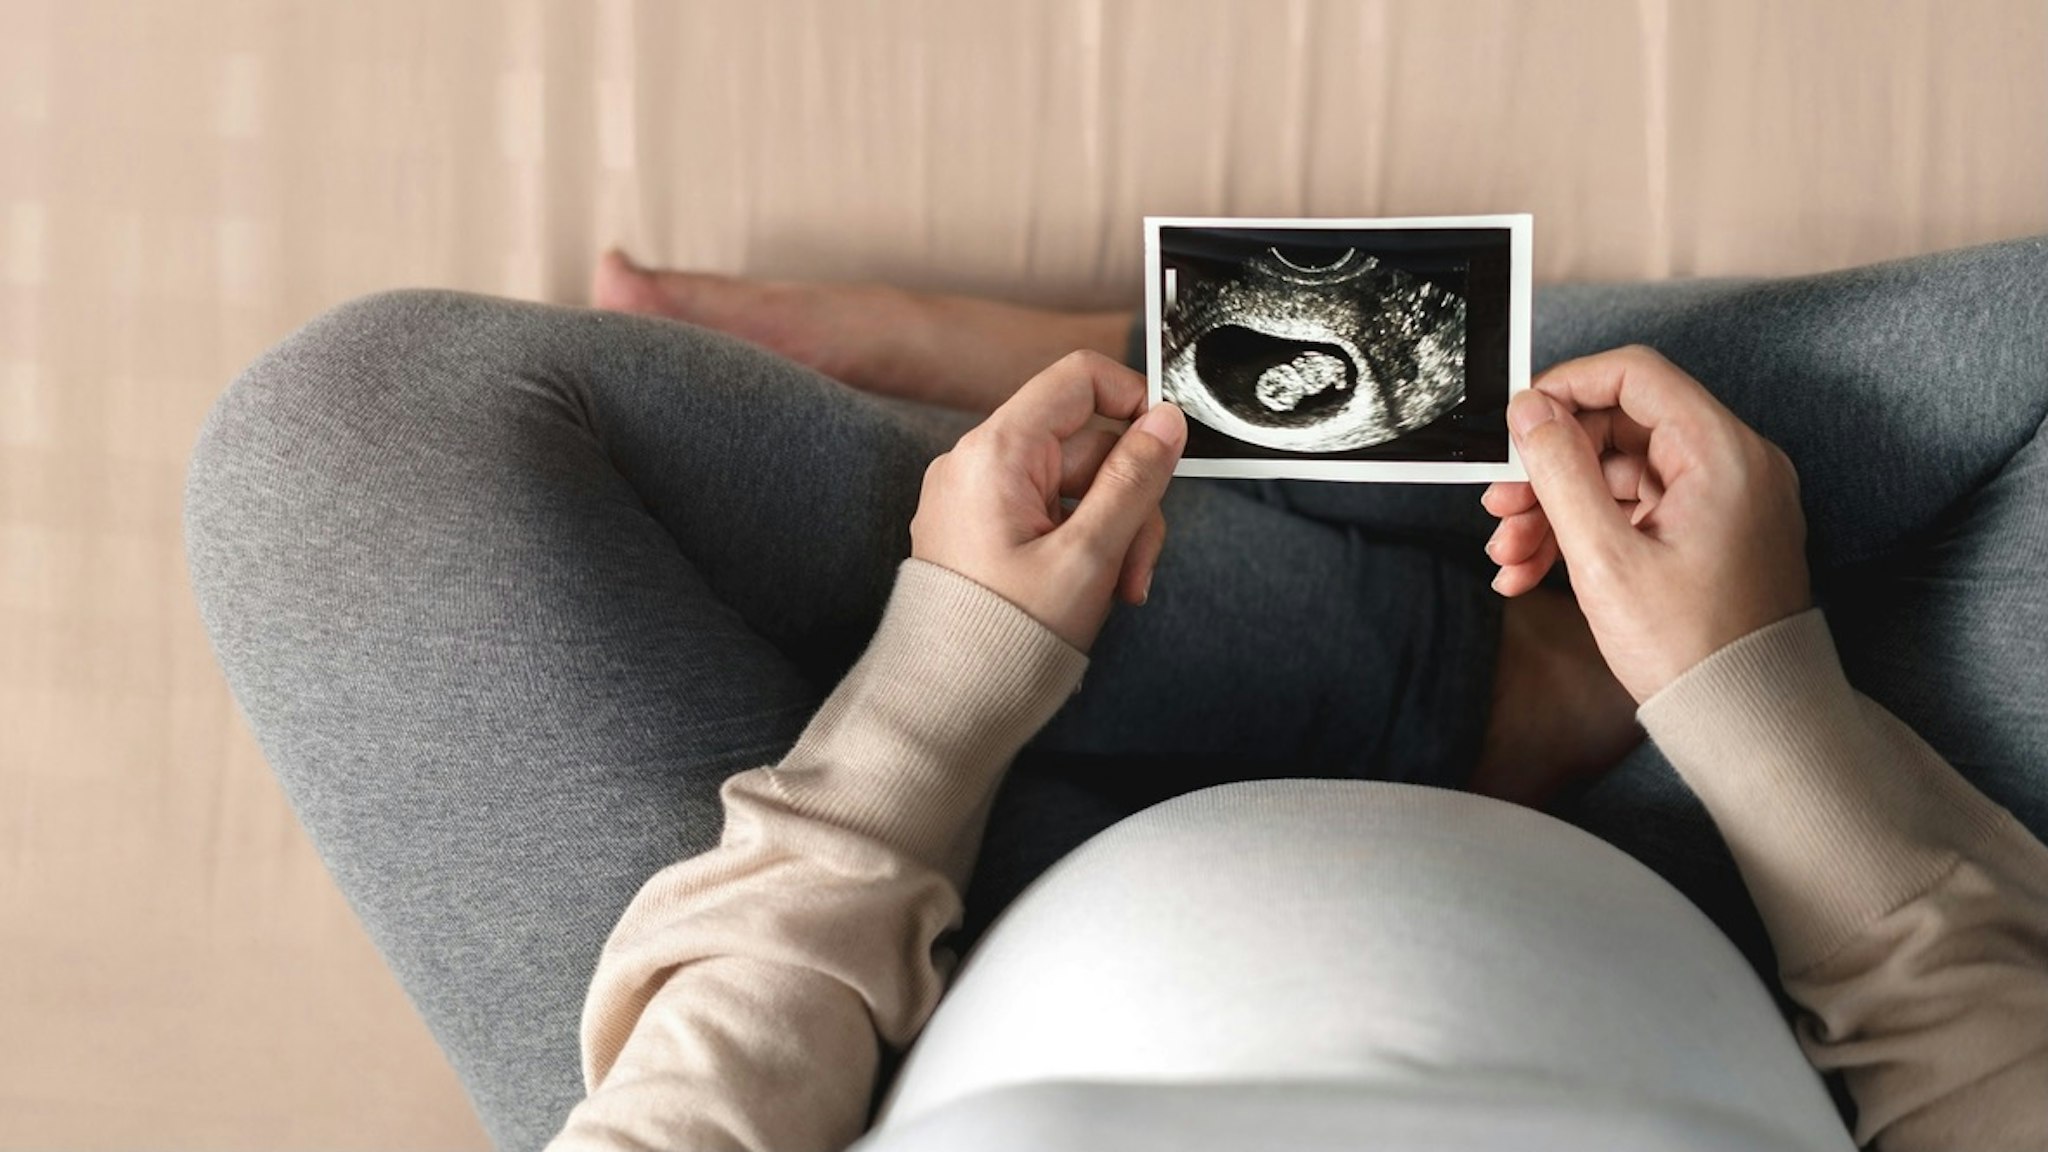 Low Section Of Pregnant Woman Holding Ultrasound Image - stock photo Chanintorn Vanichsawangphan / EyeEm via Getty Images